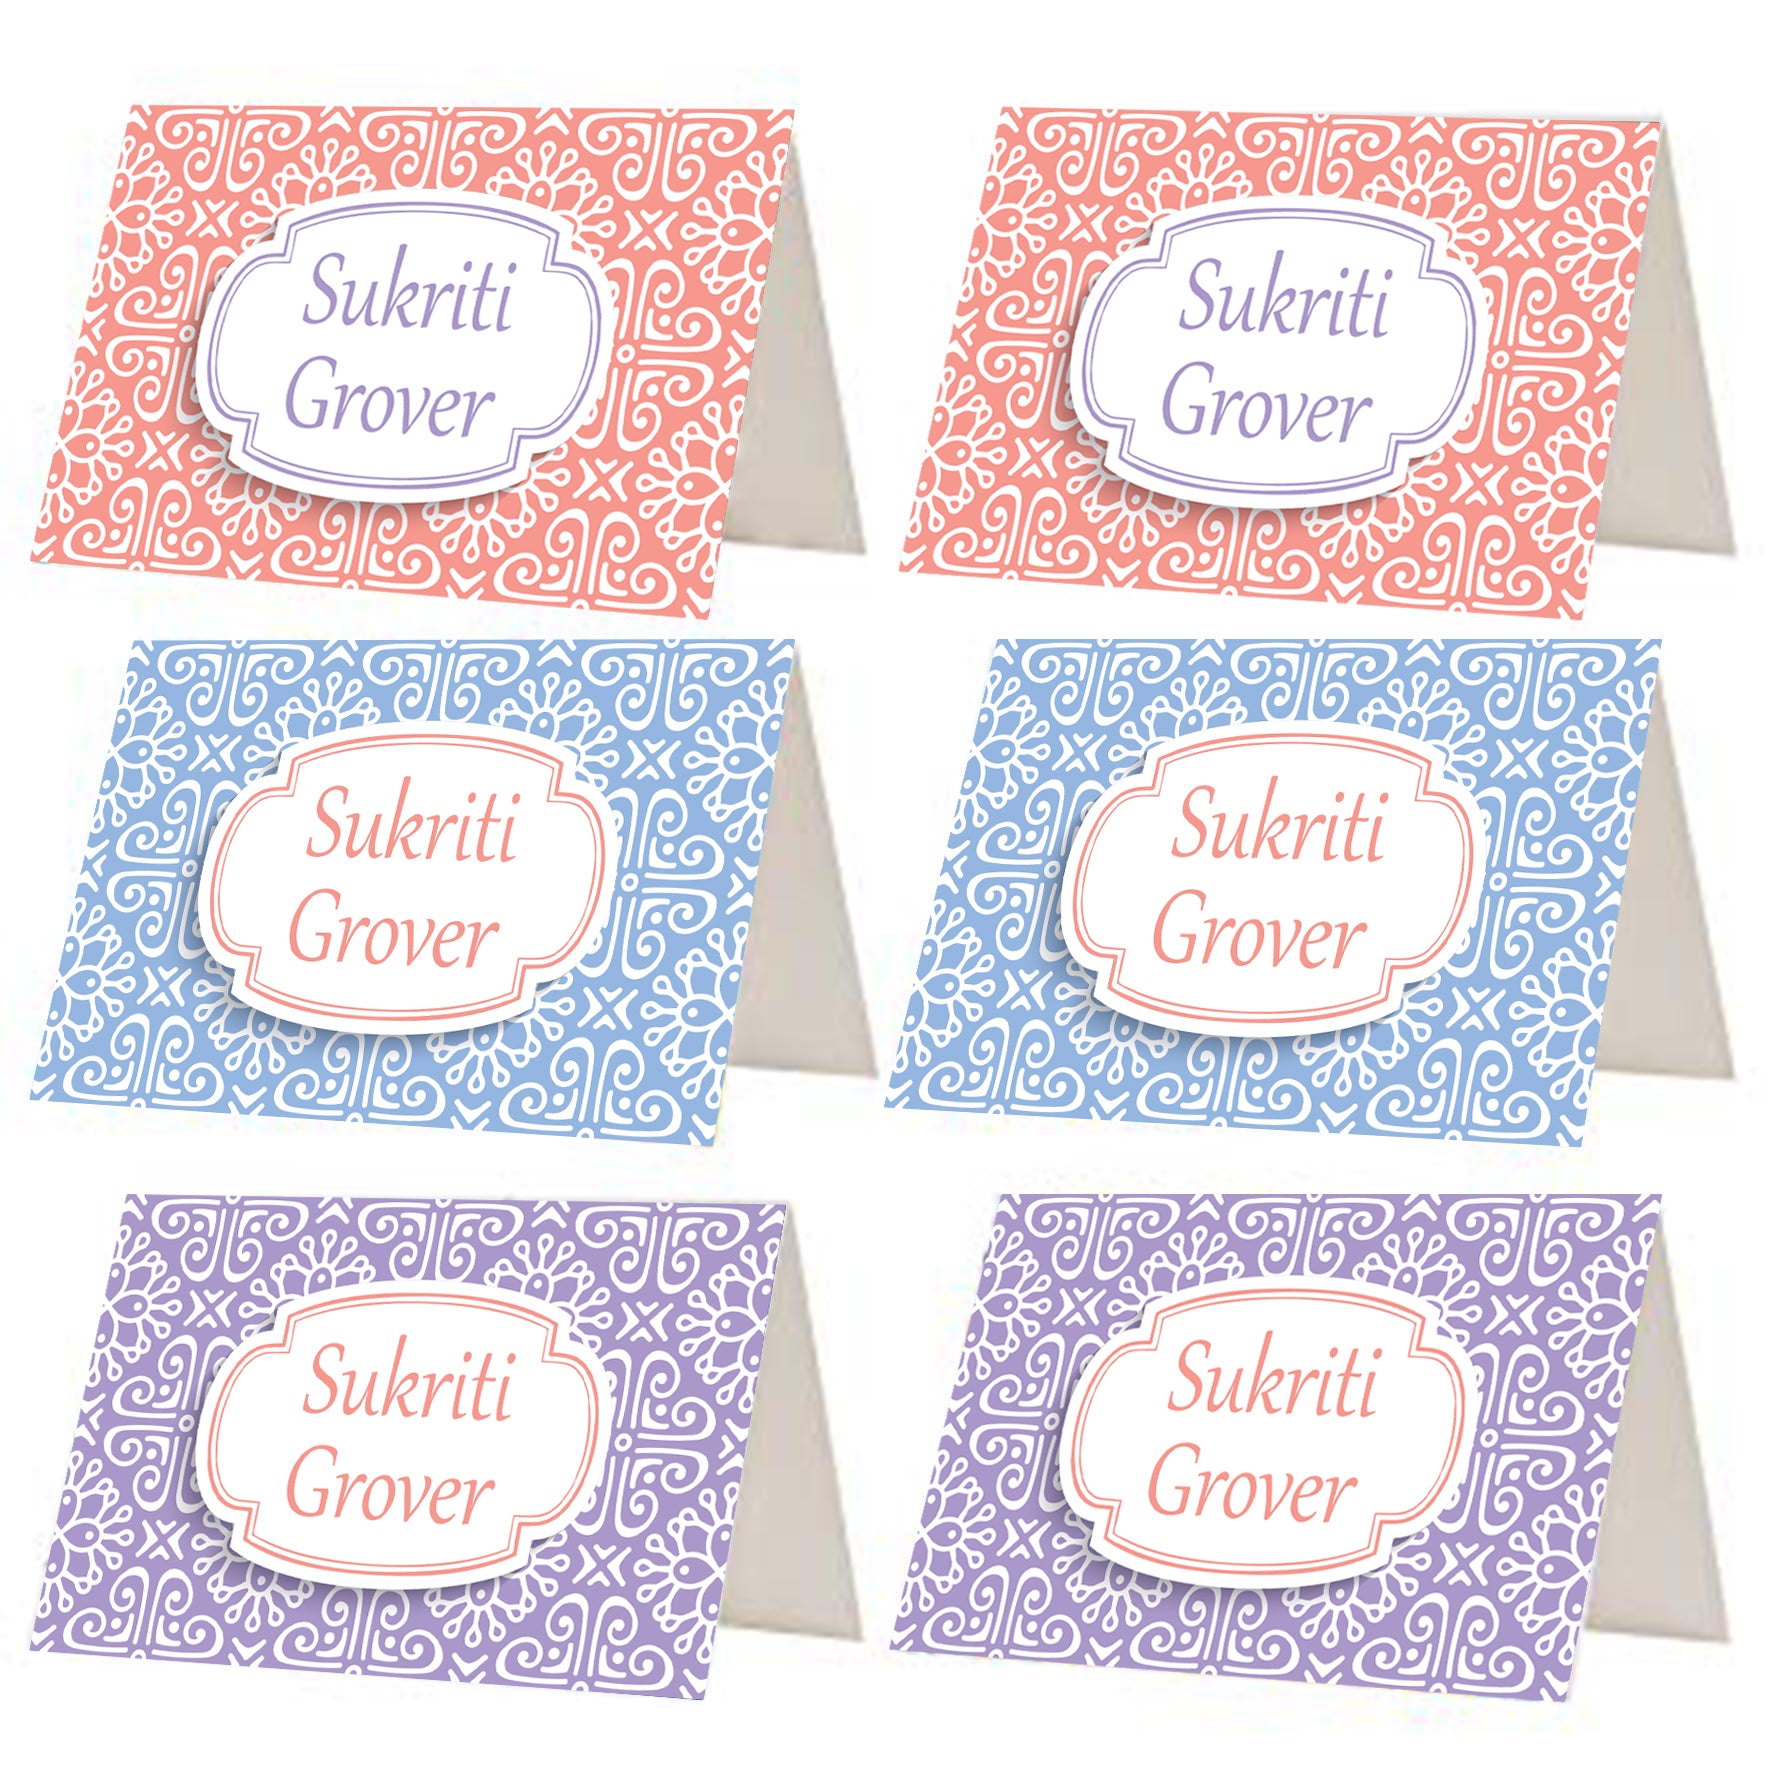 Urbanhand urban hand Personalise Pastel Pattern best wishes gift tags colourful attractive set of 12 and 24